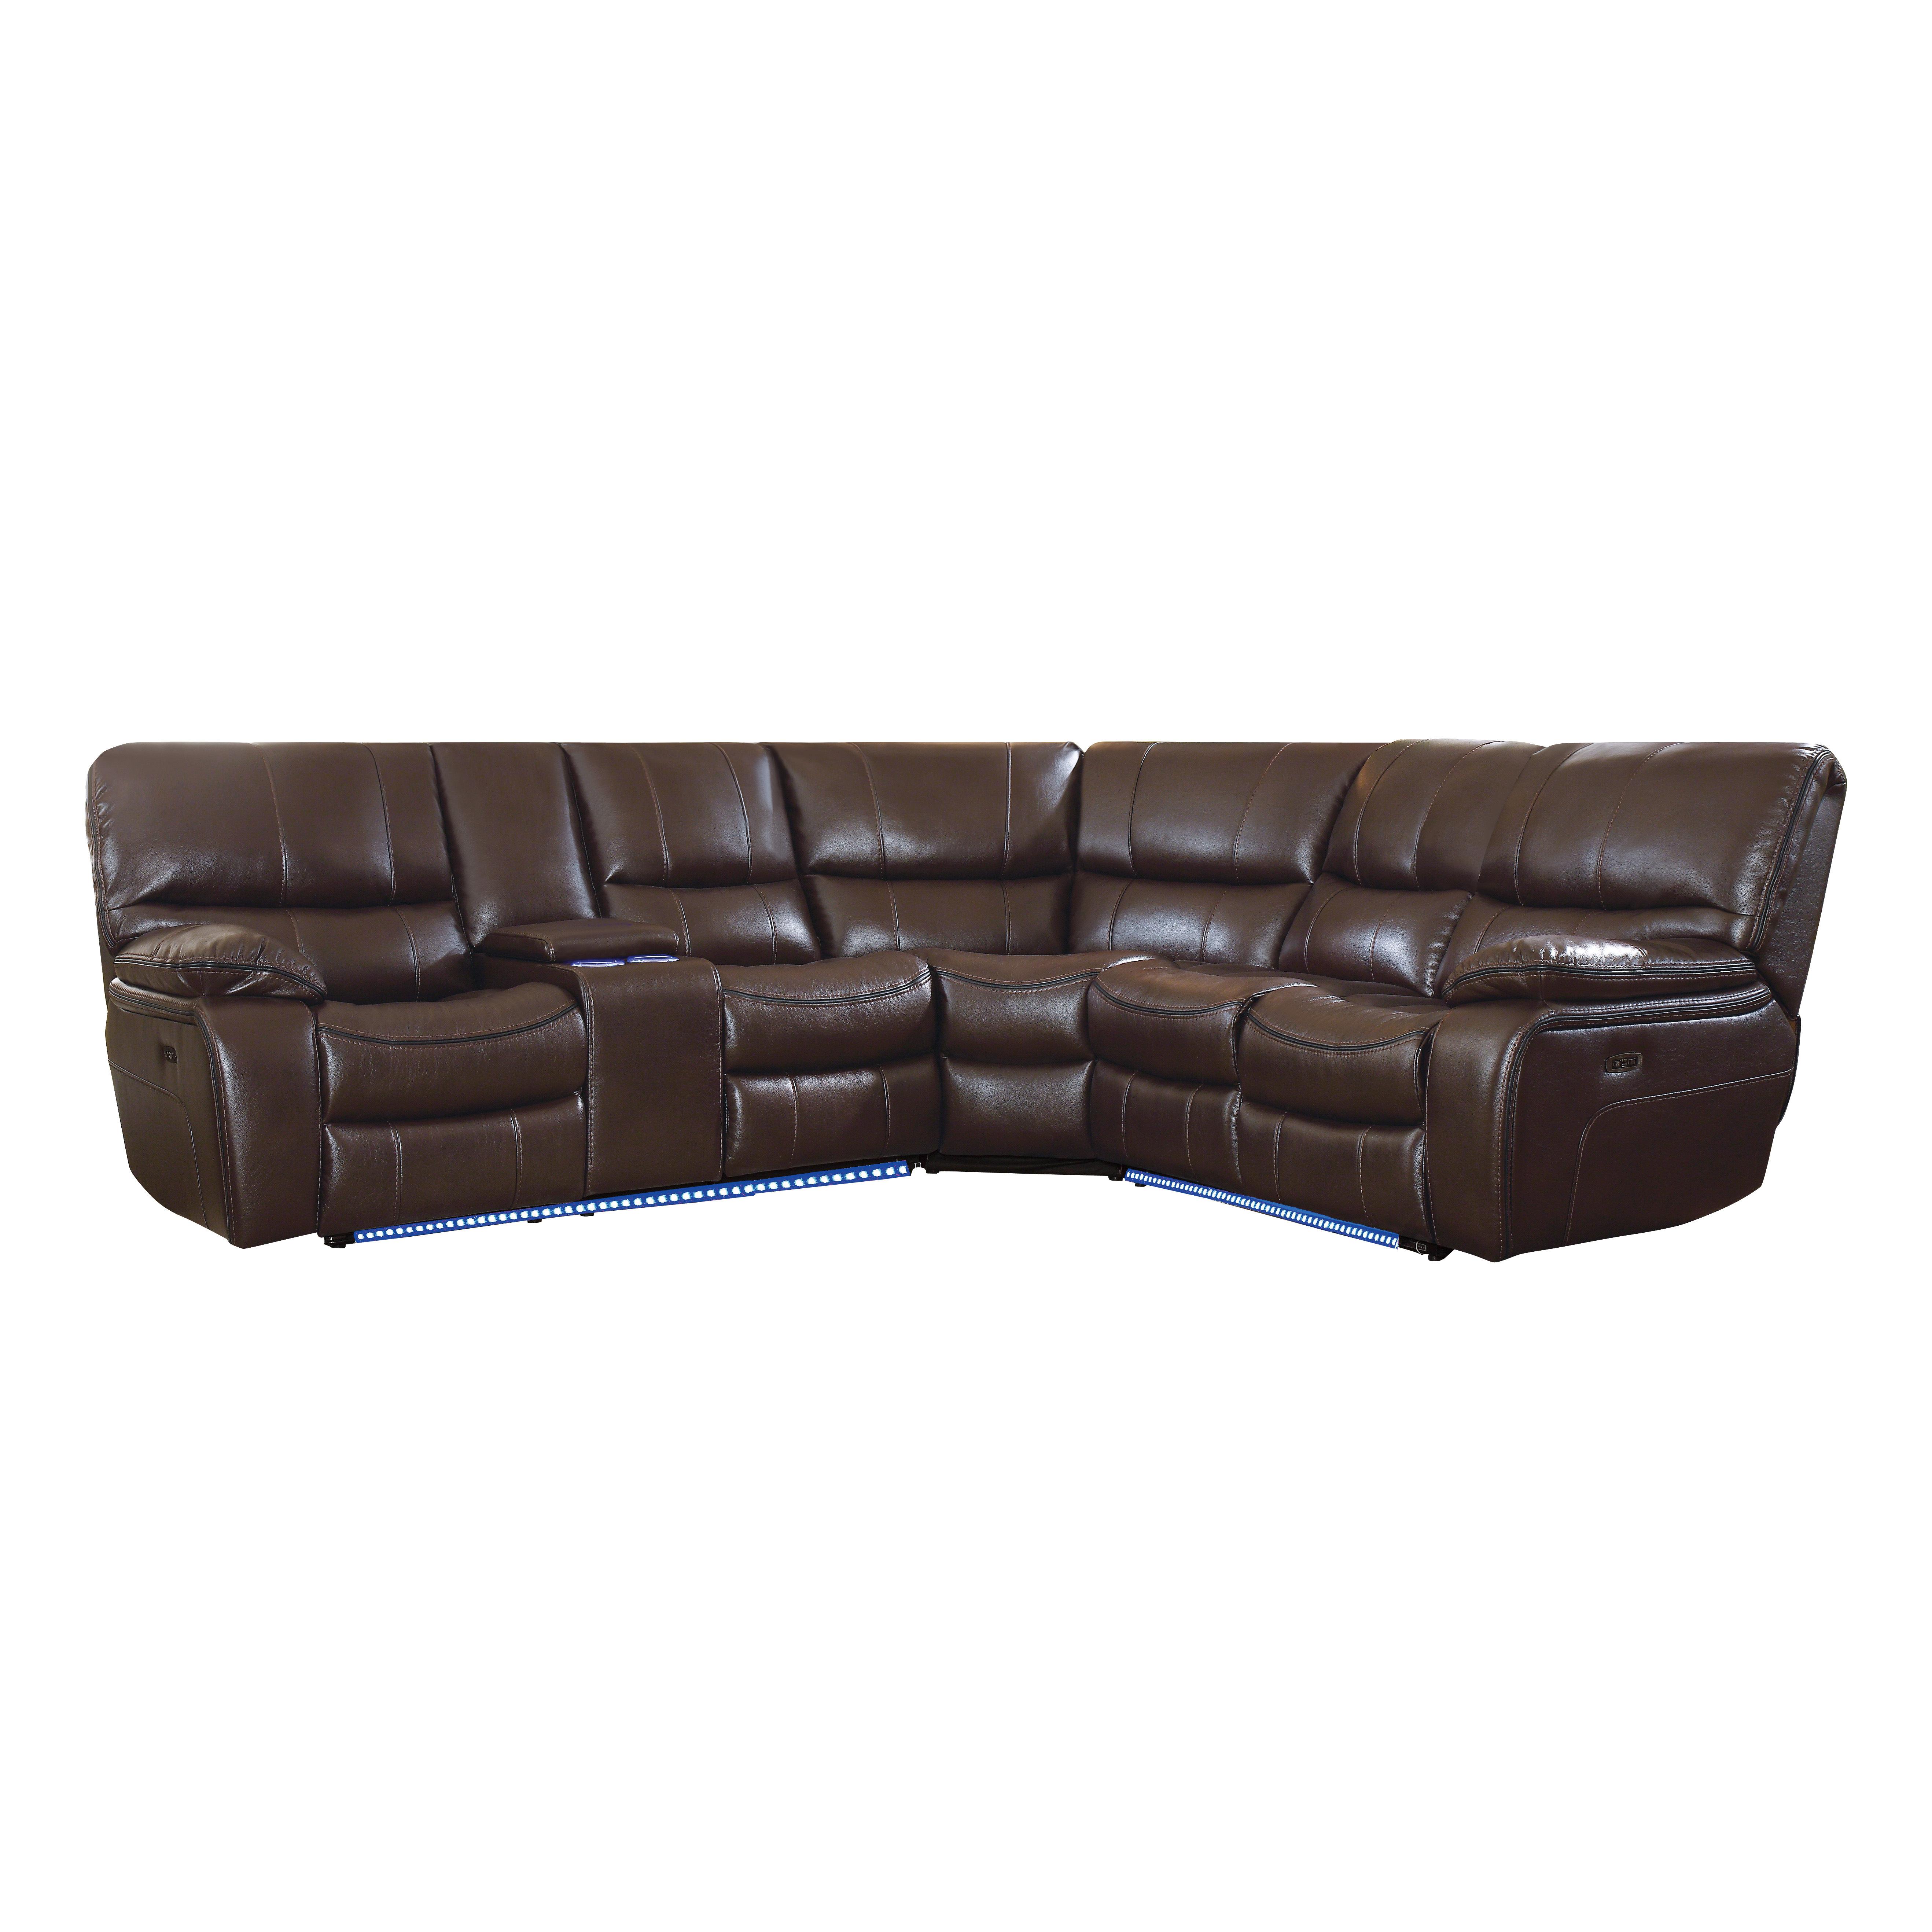 Modern Power Reclining Sectional 8480BRW*3SCPD Pecos 8480BRW*3SCPD in Dark Brown Faux Leather